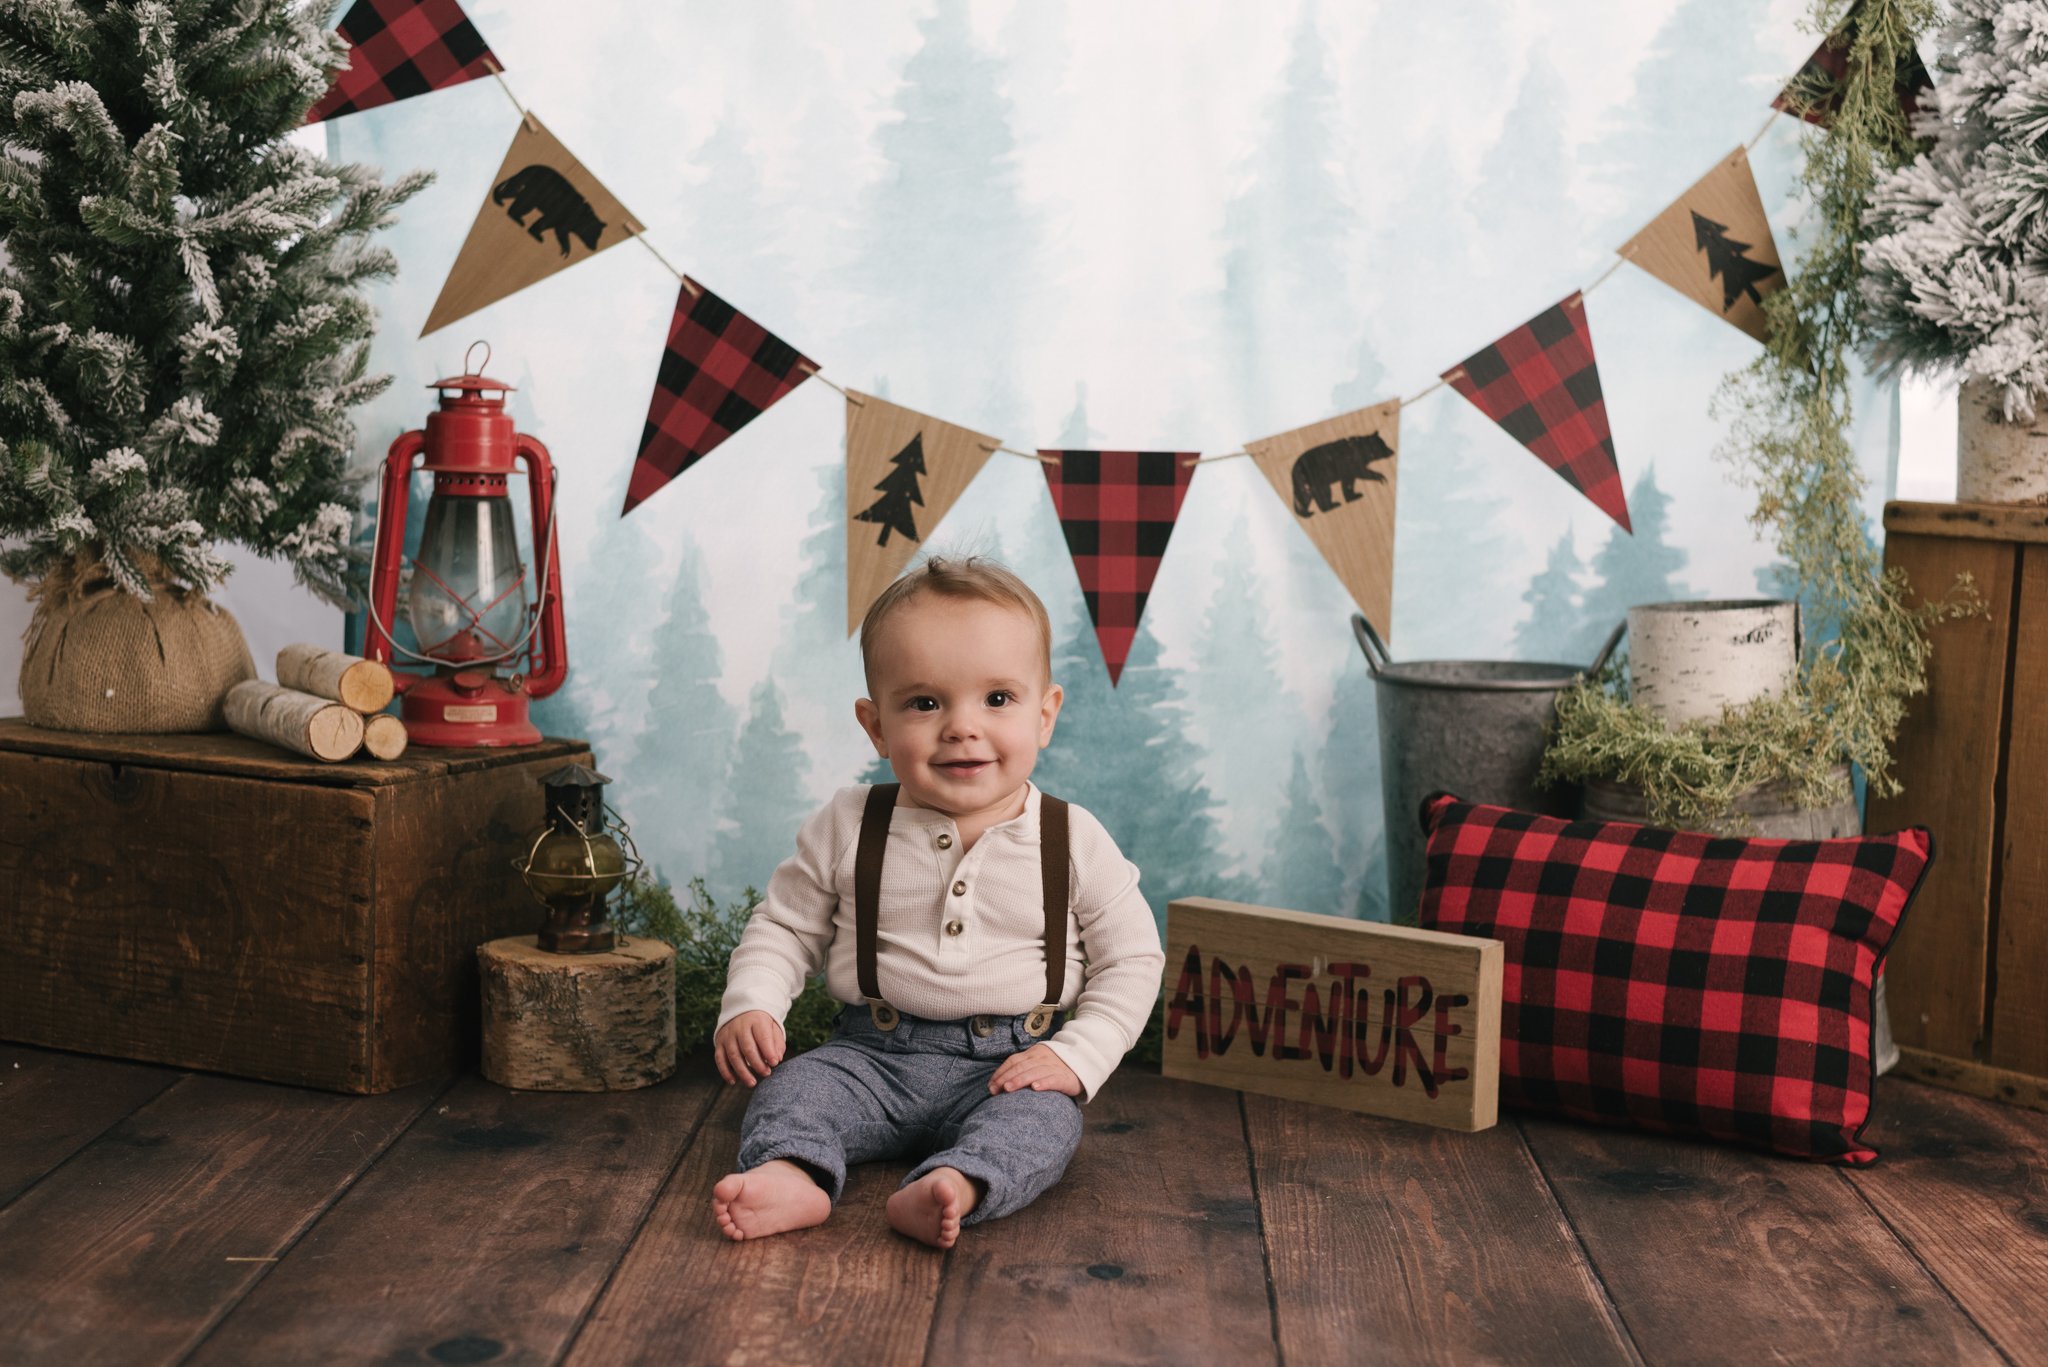 Lumber_Jack_Frist_Birthday_Boy_Smash_and_Splash_Session_Cake_Studio_by_Erika_Child_and_Family_Photographer_for_Christie_Leigh_Photo_in_Southington_OH_Ohio_Trumbull_County_002.jpg